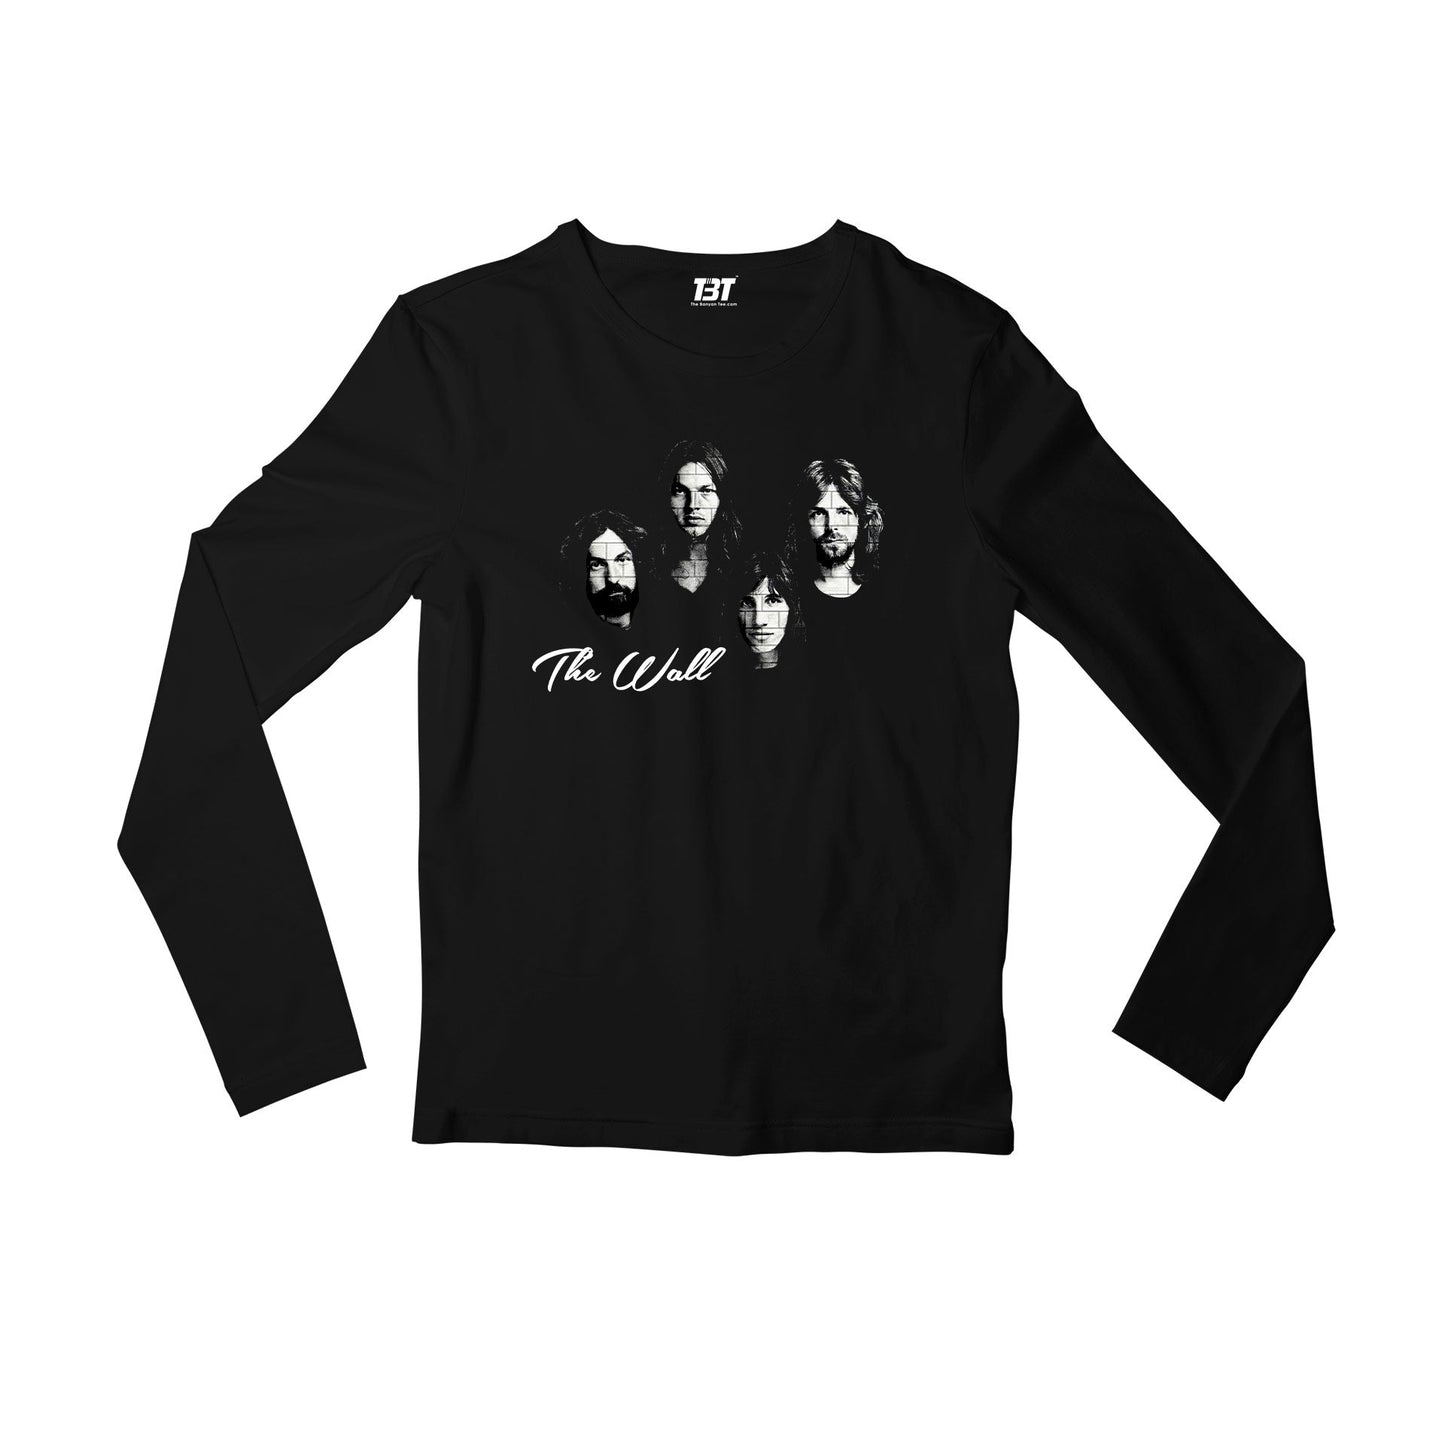 The Wall Pink Floyd Full Sleeves Long Sleeve for men girl combo under 200 best brand T-shirt - The Wall The Banyan Tee TBT